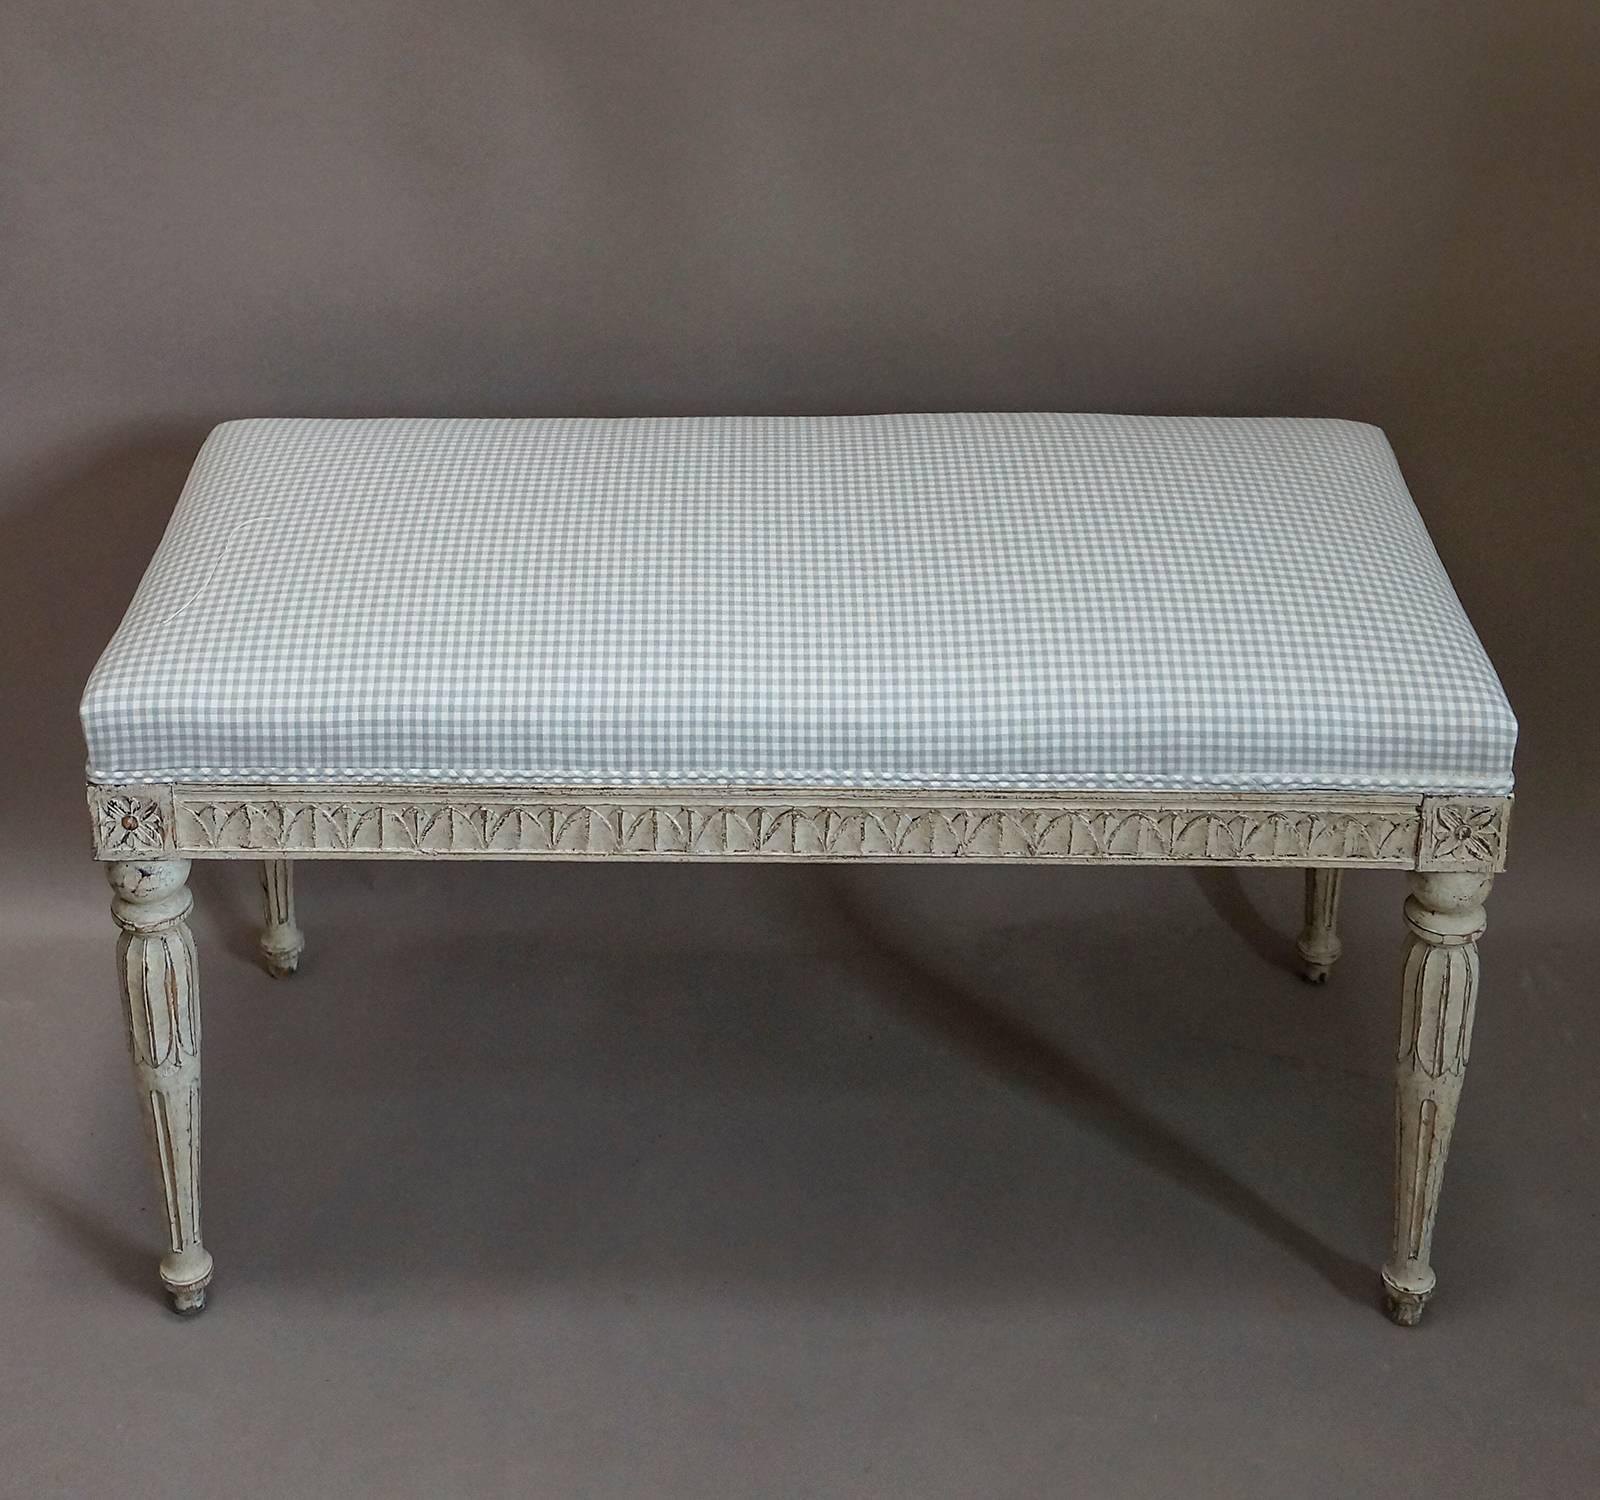 Swedish bench in the Gustavian style, circa 1900. Lamb’s tongue molding on the apron with florets at the corner blocks. Tapering round legs with lotus blossom carving at the top.